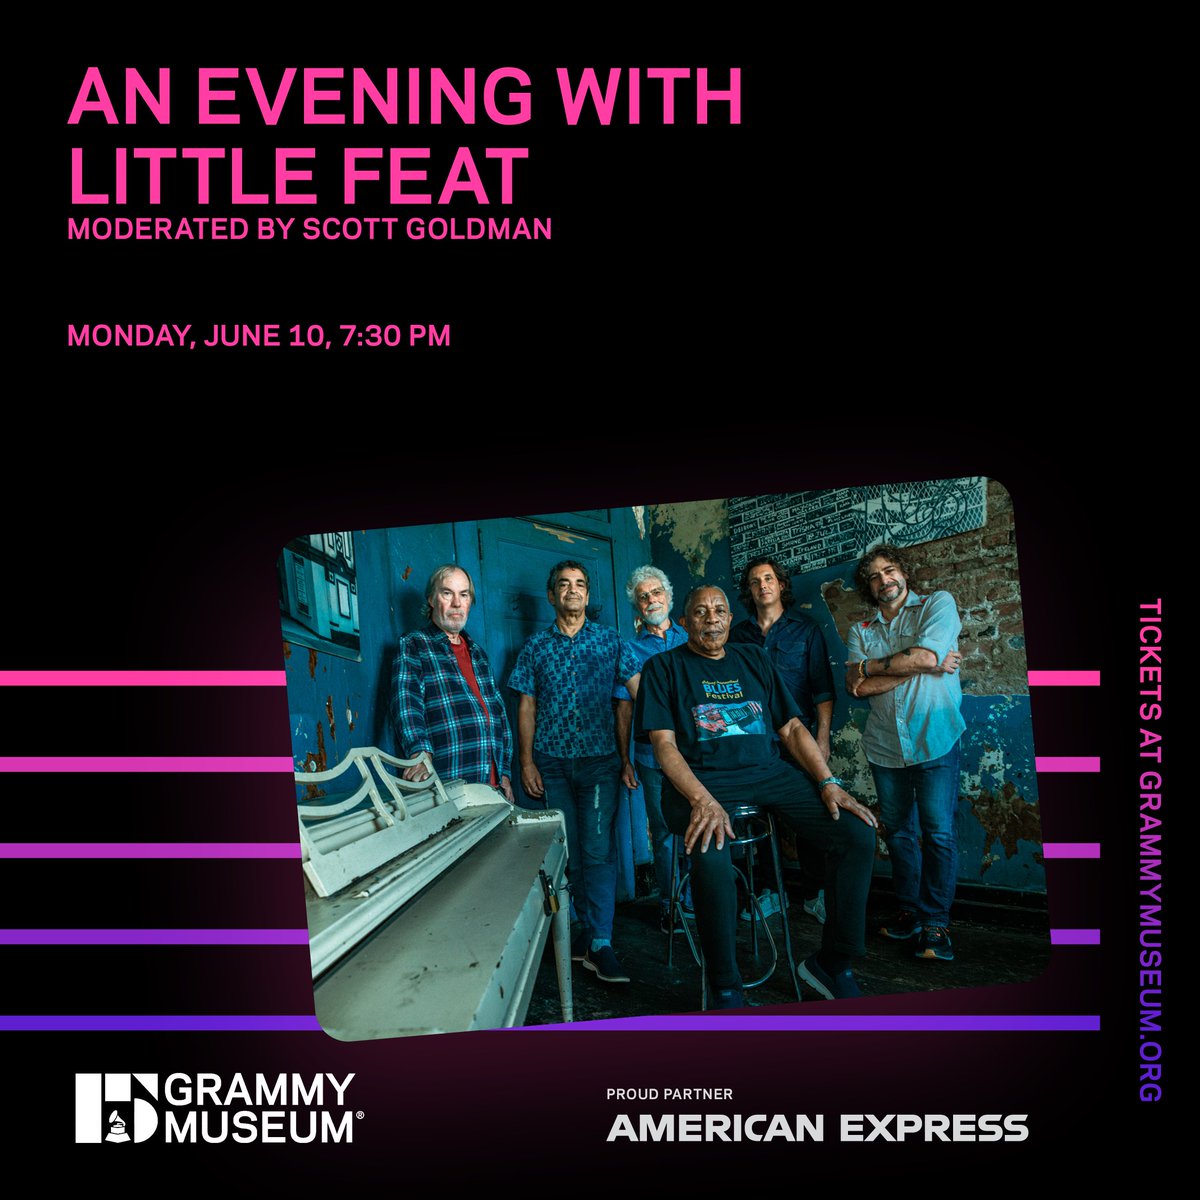 Feeling alive in America with @littlefeattweet at the #GRAMMYMuseum! 🙌

The band will perform and speak with moderator Scott Goldman about their upcoming album 'Sam's Place' on June 10.

🎟️ #AmexPresale tickets now available (#withAmex terms apply): grm.my/44y1qYq